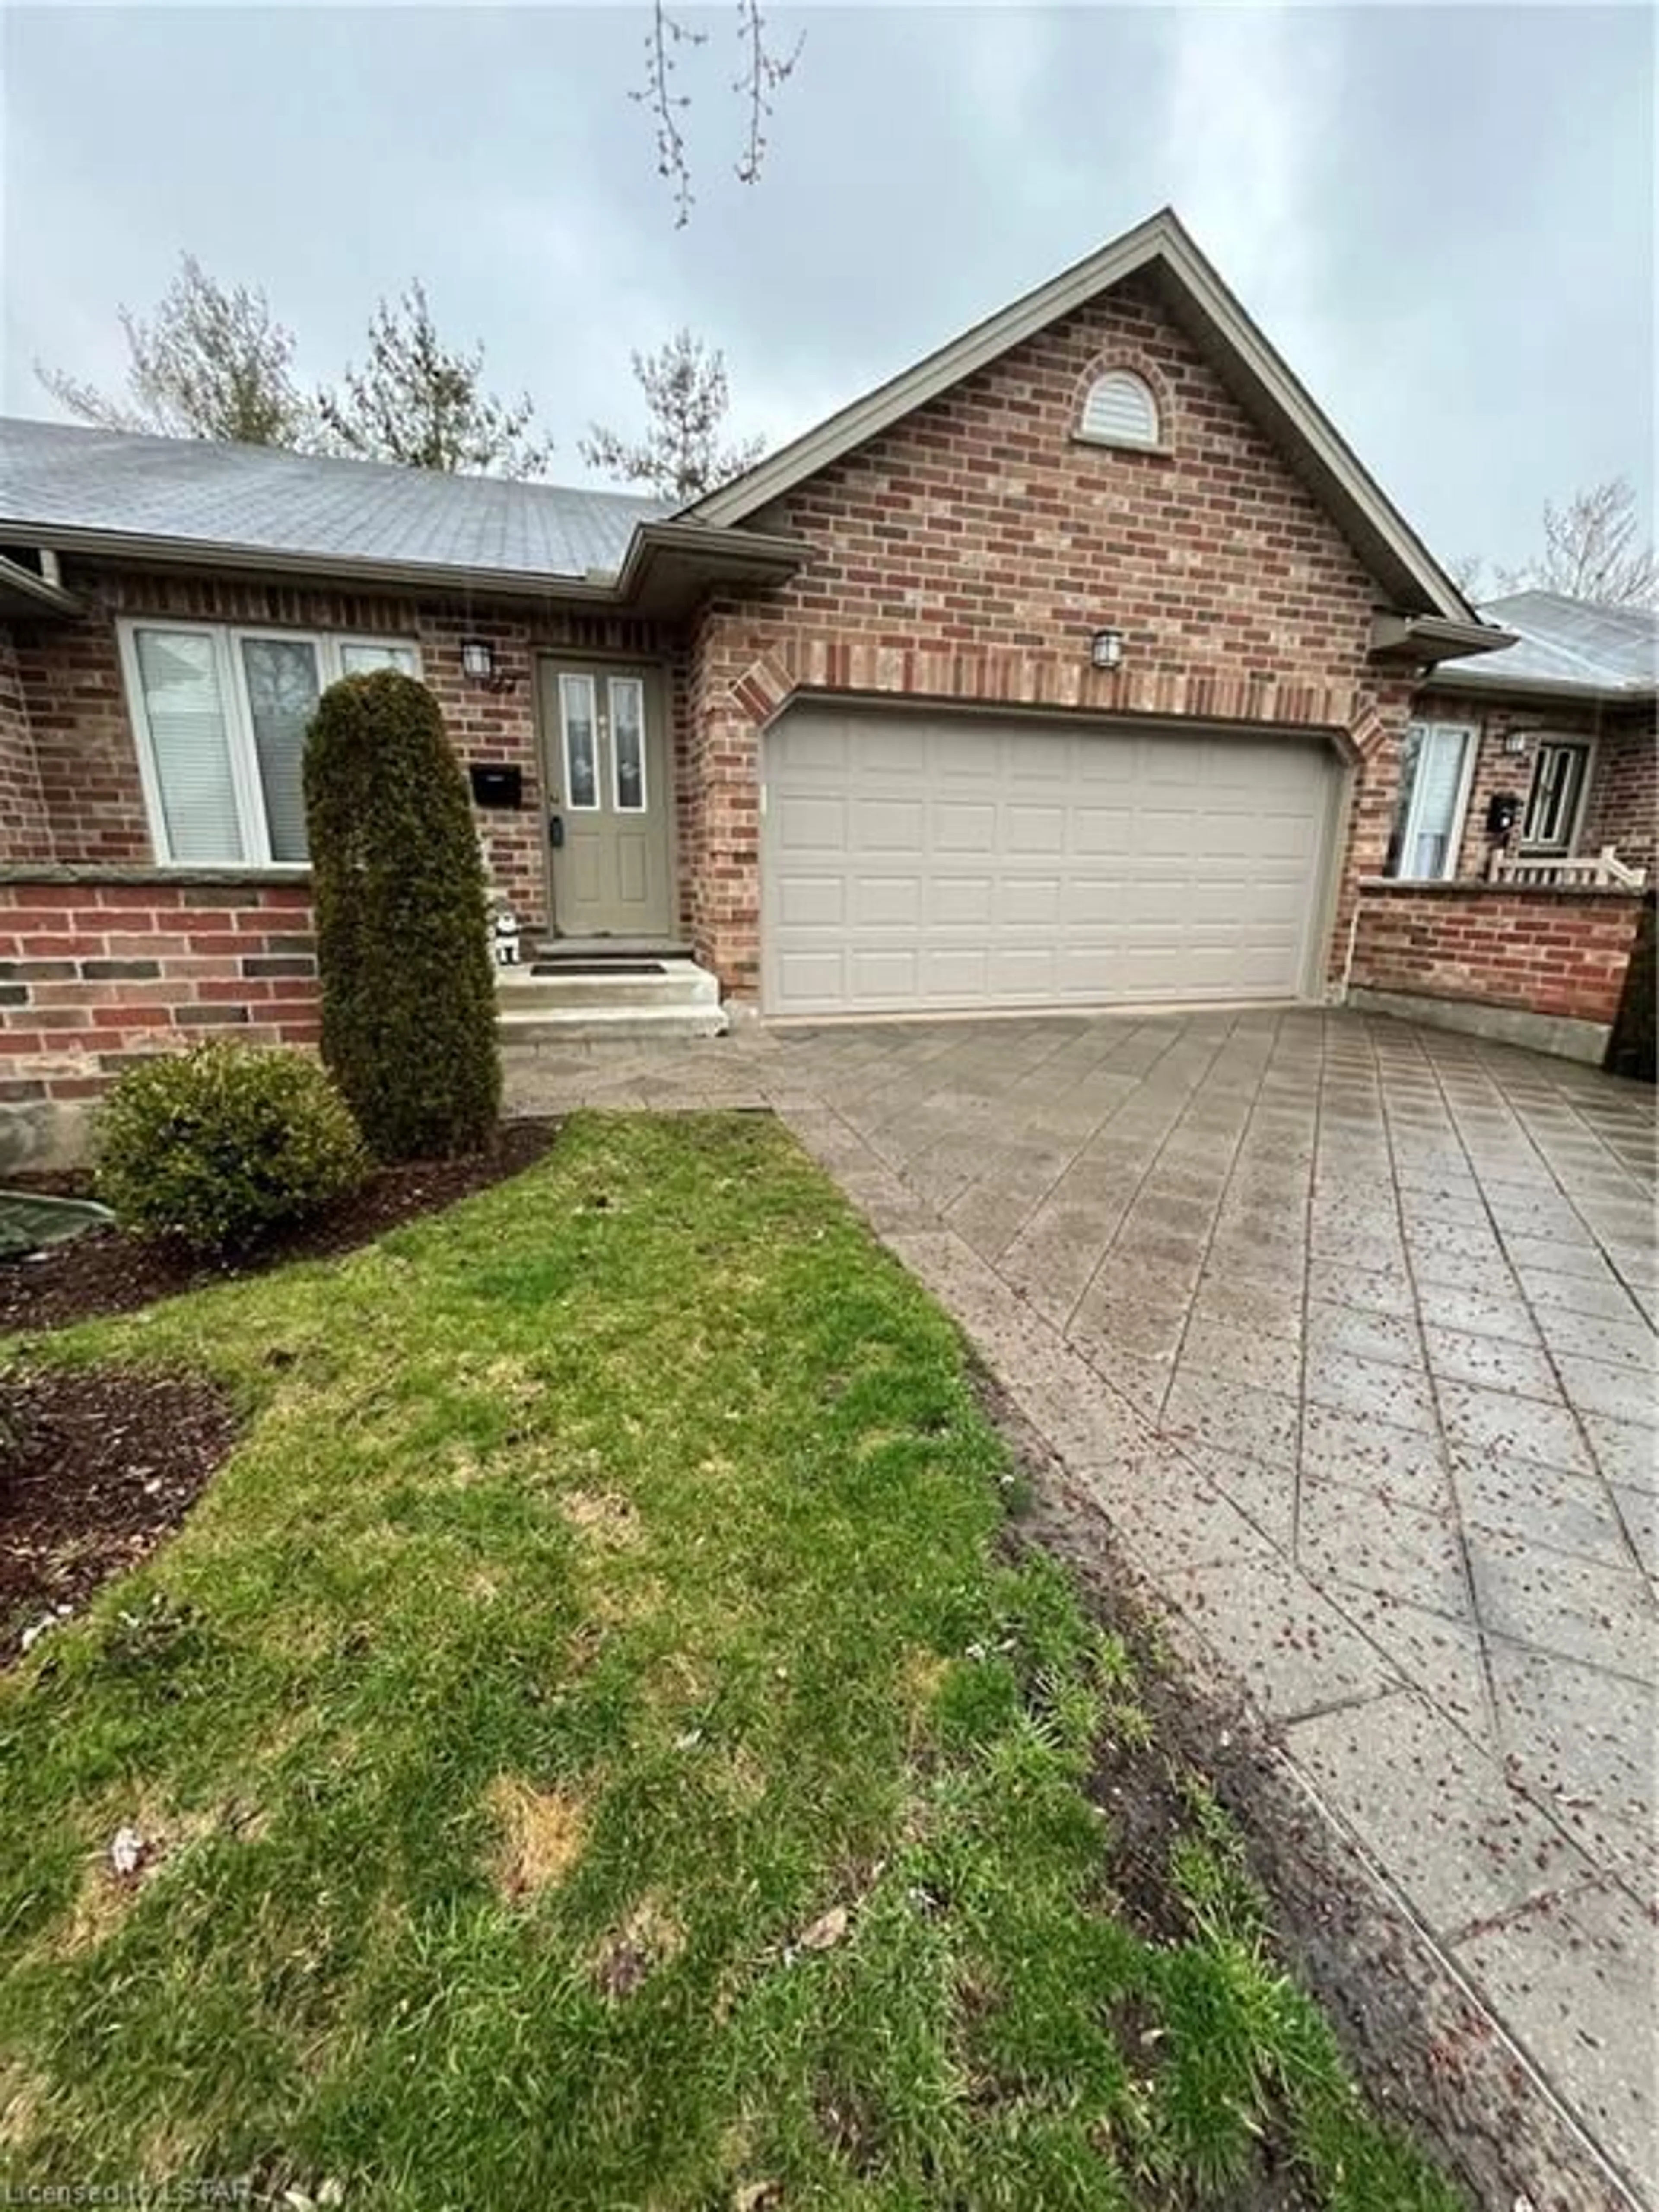 Home with brick exterior material for 43 Capulet Walk #27, London Ontario N6H 5V4